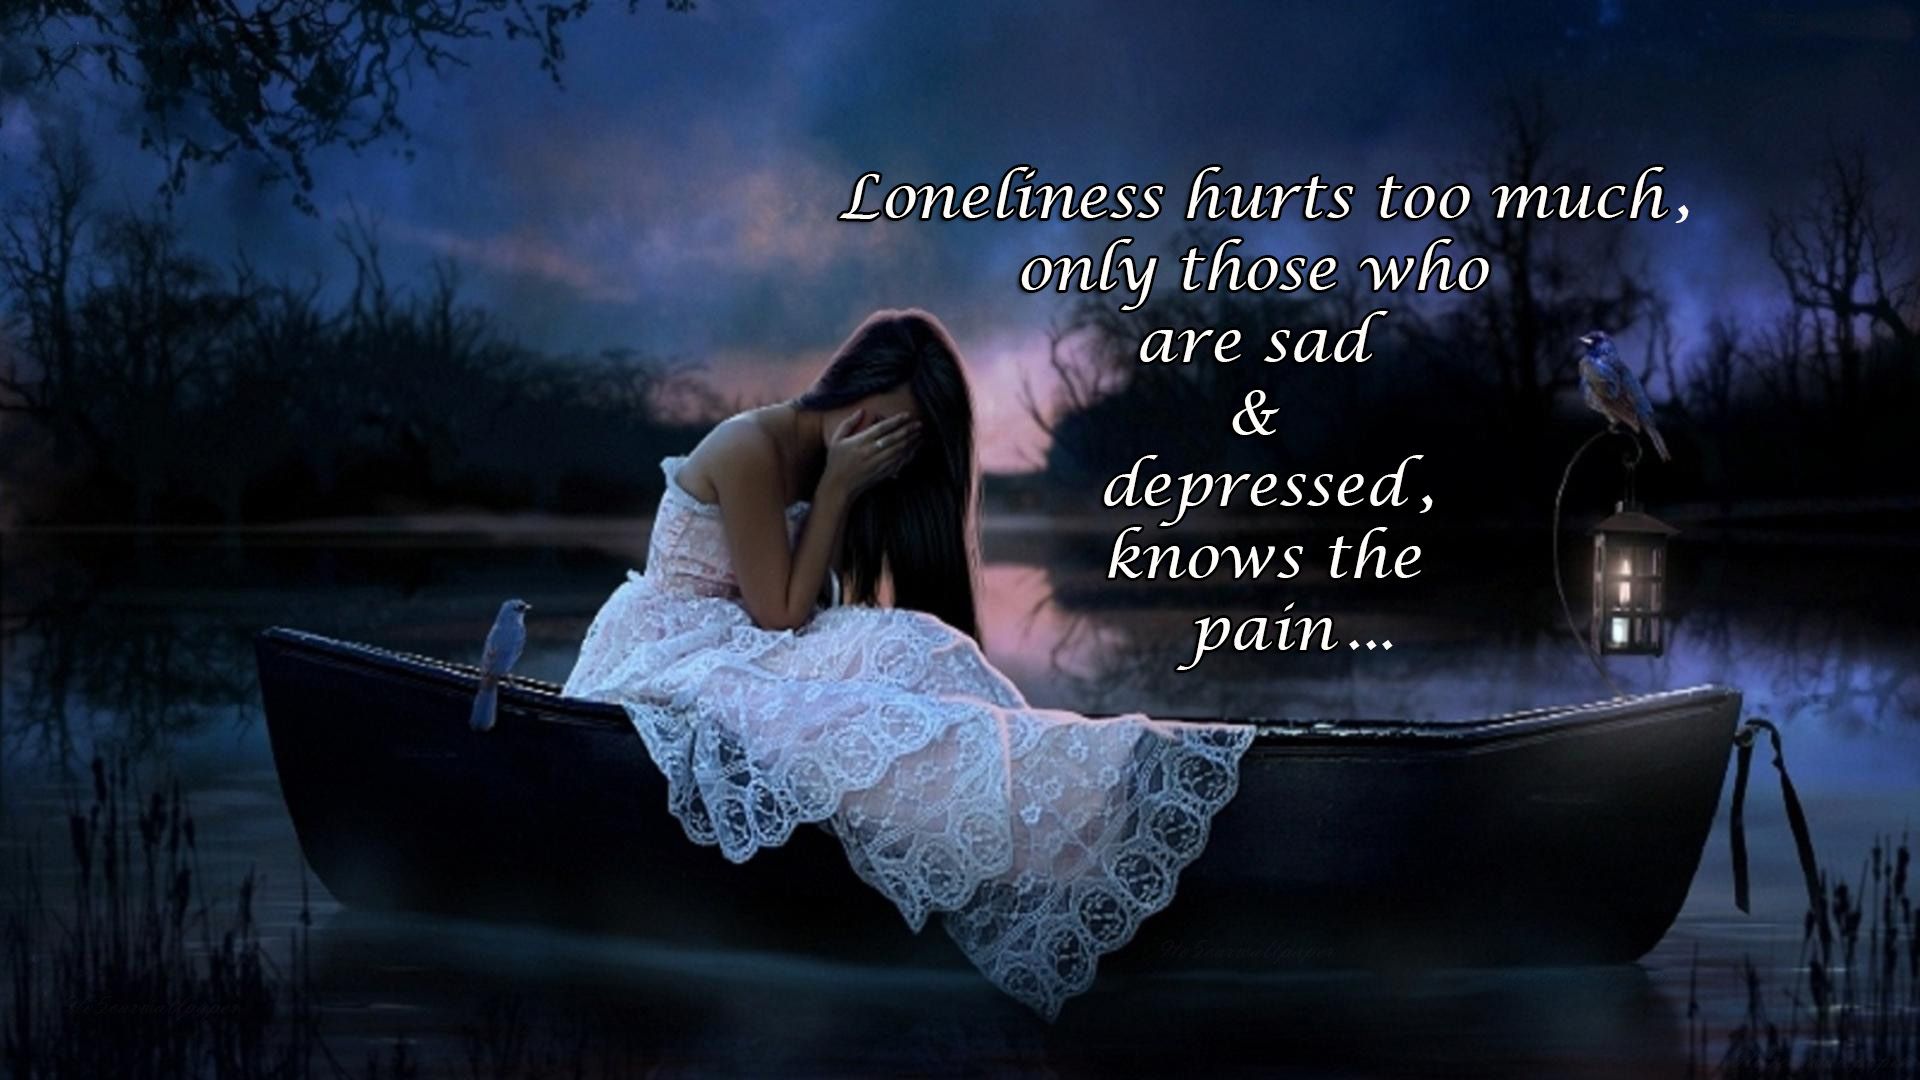 Loneliness Prevails Sadness Quotes, Image & HD Wallpaper Car Wallpaper